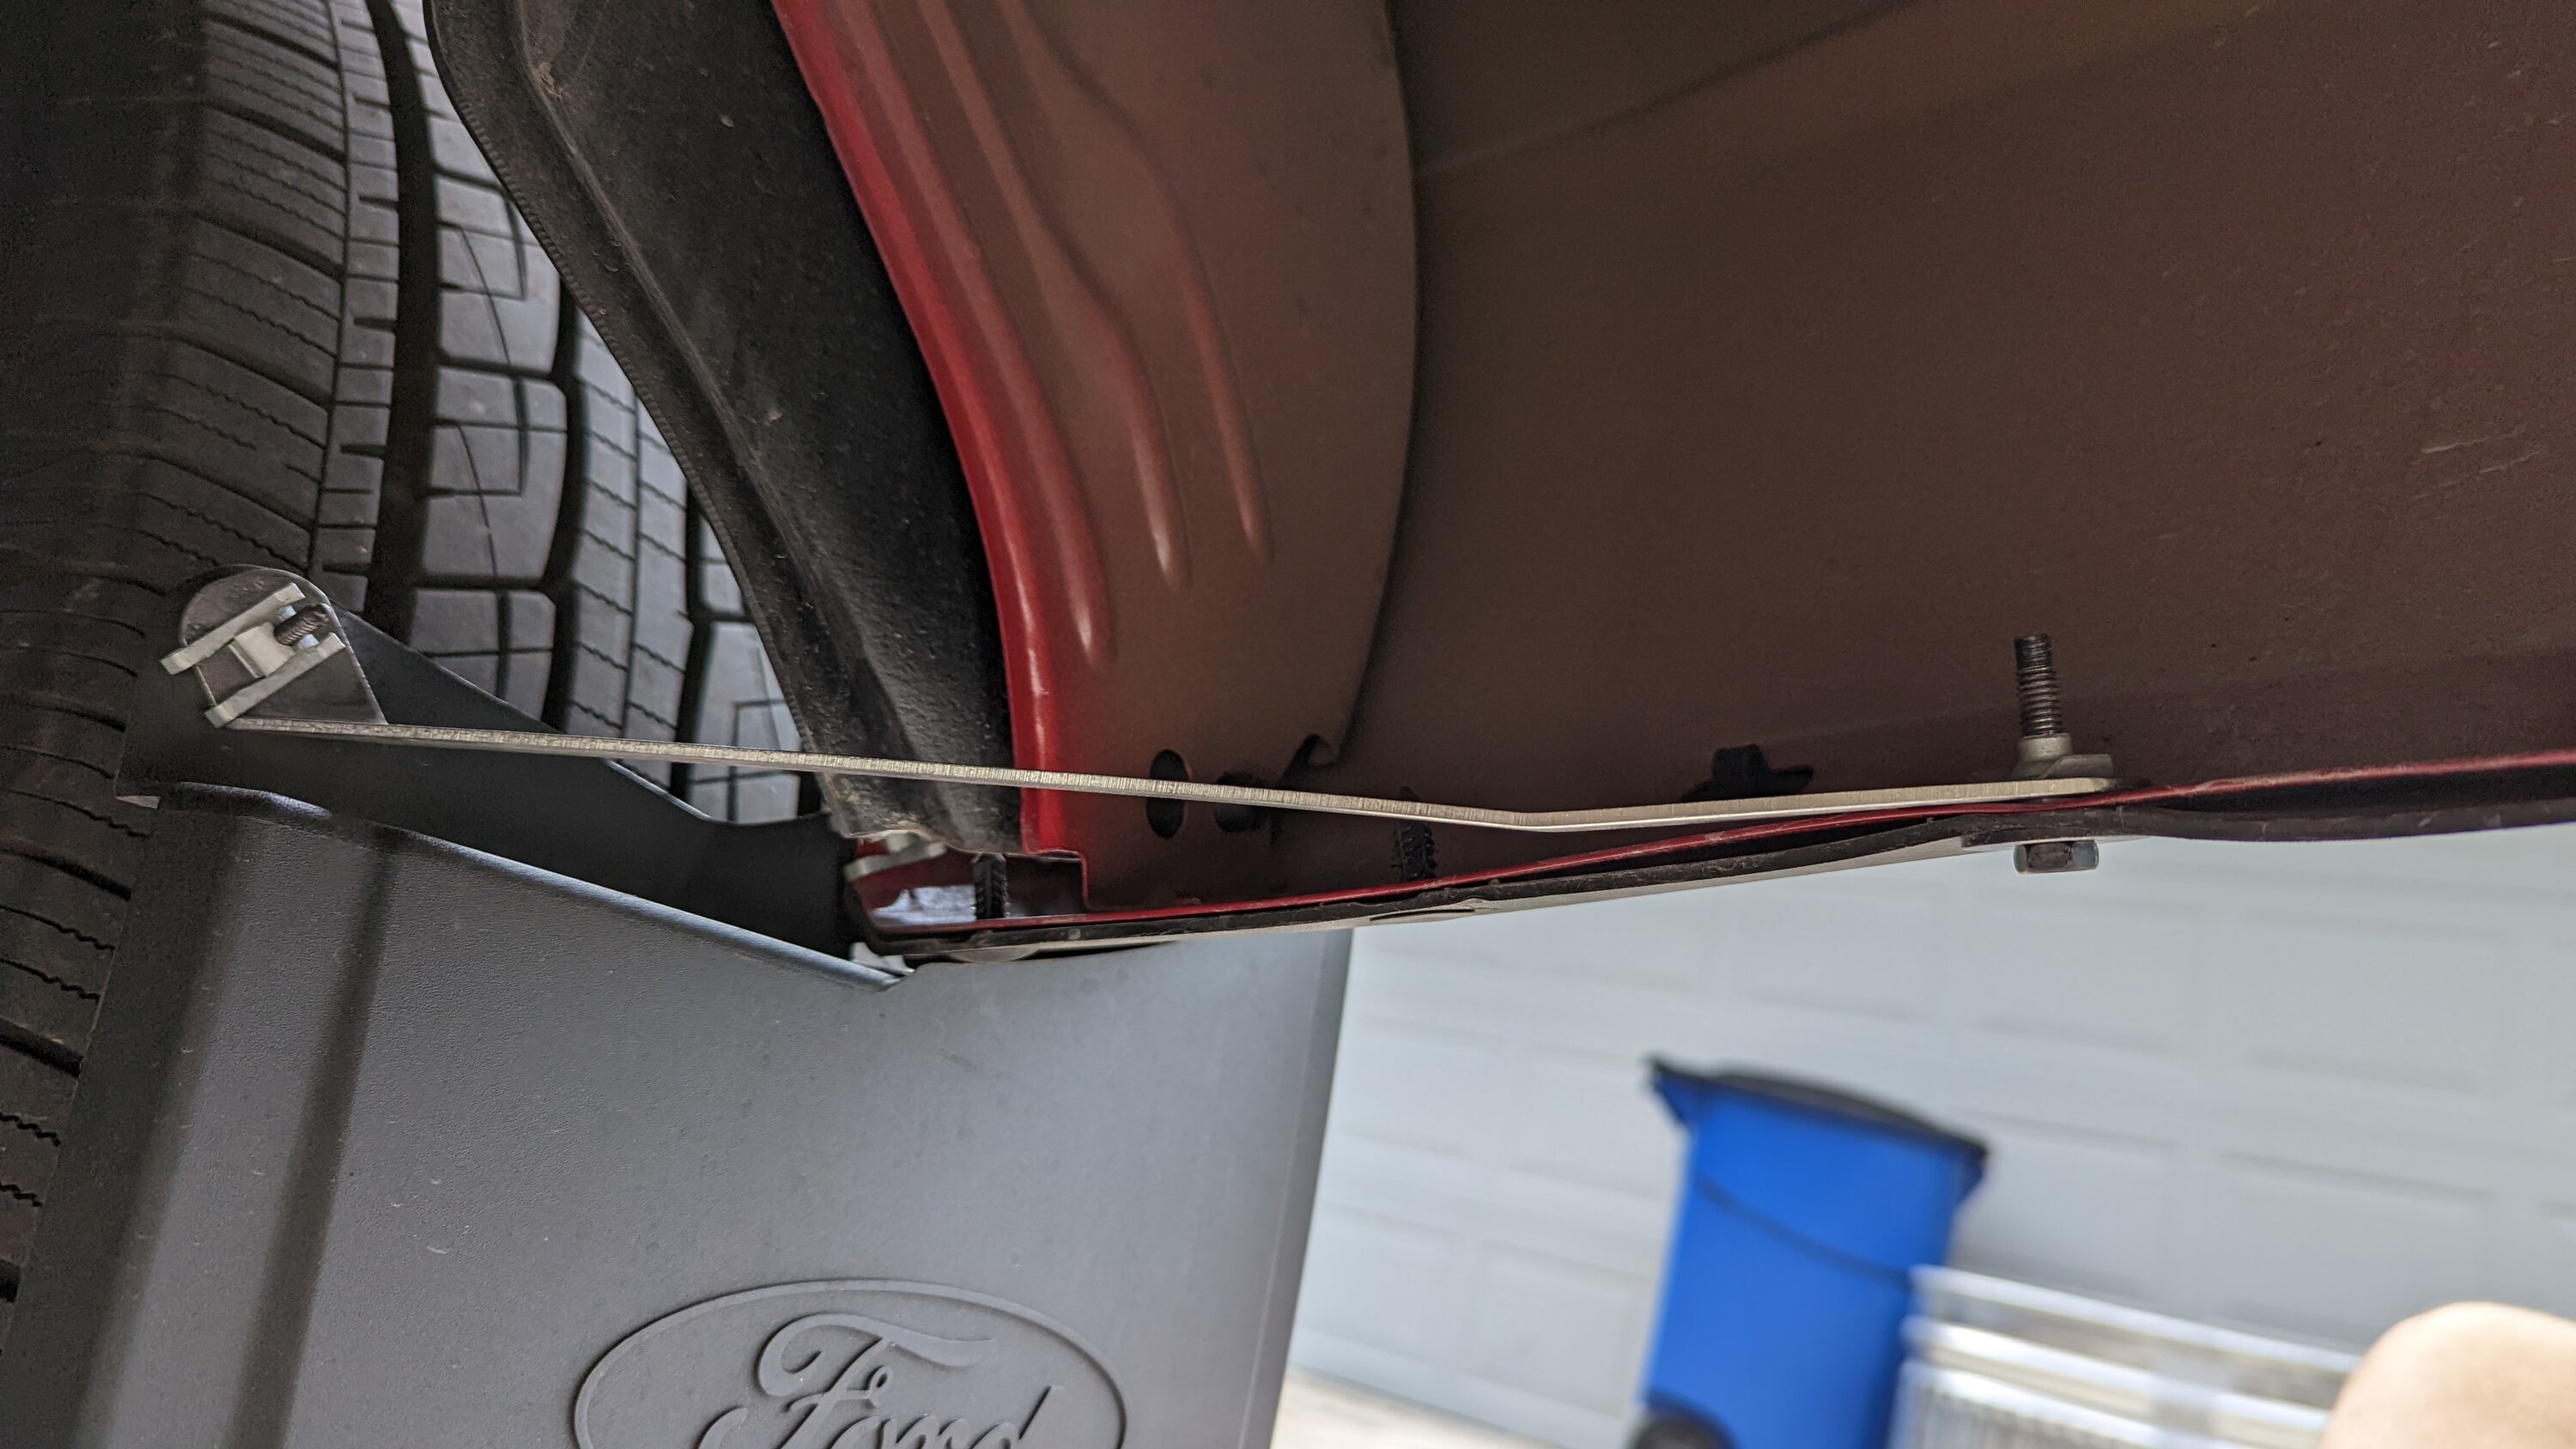 Ford F-150 Lightning Do ICE F-150 mud flaps fit the Lightning? PXL_20220810_205337434